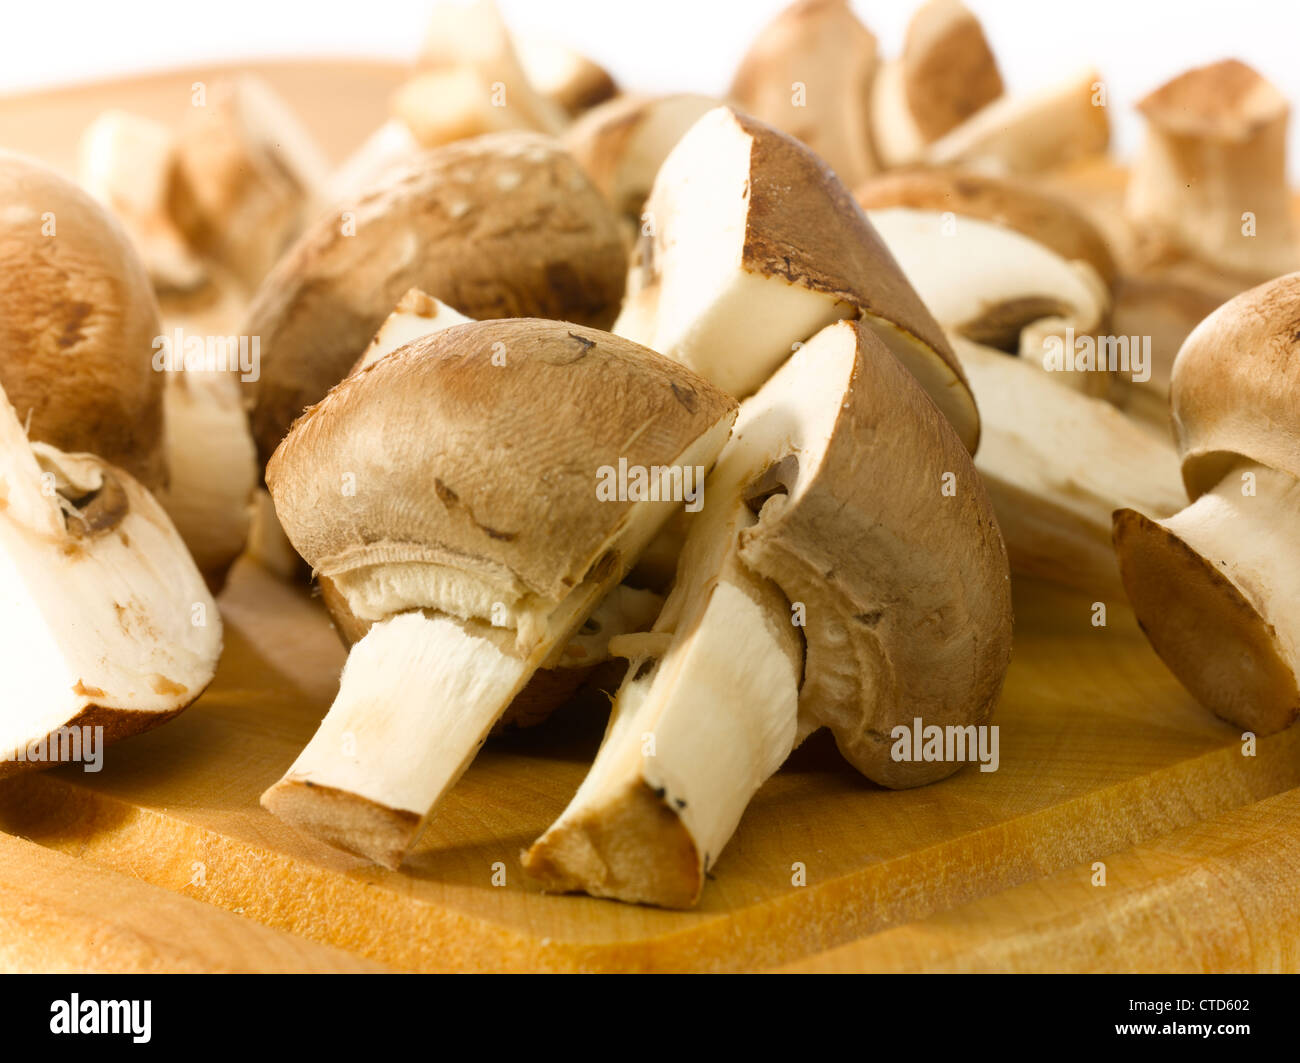 Close-up of champignons cut in half on a wooden cutting board. Stock Photo